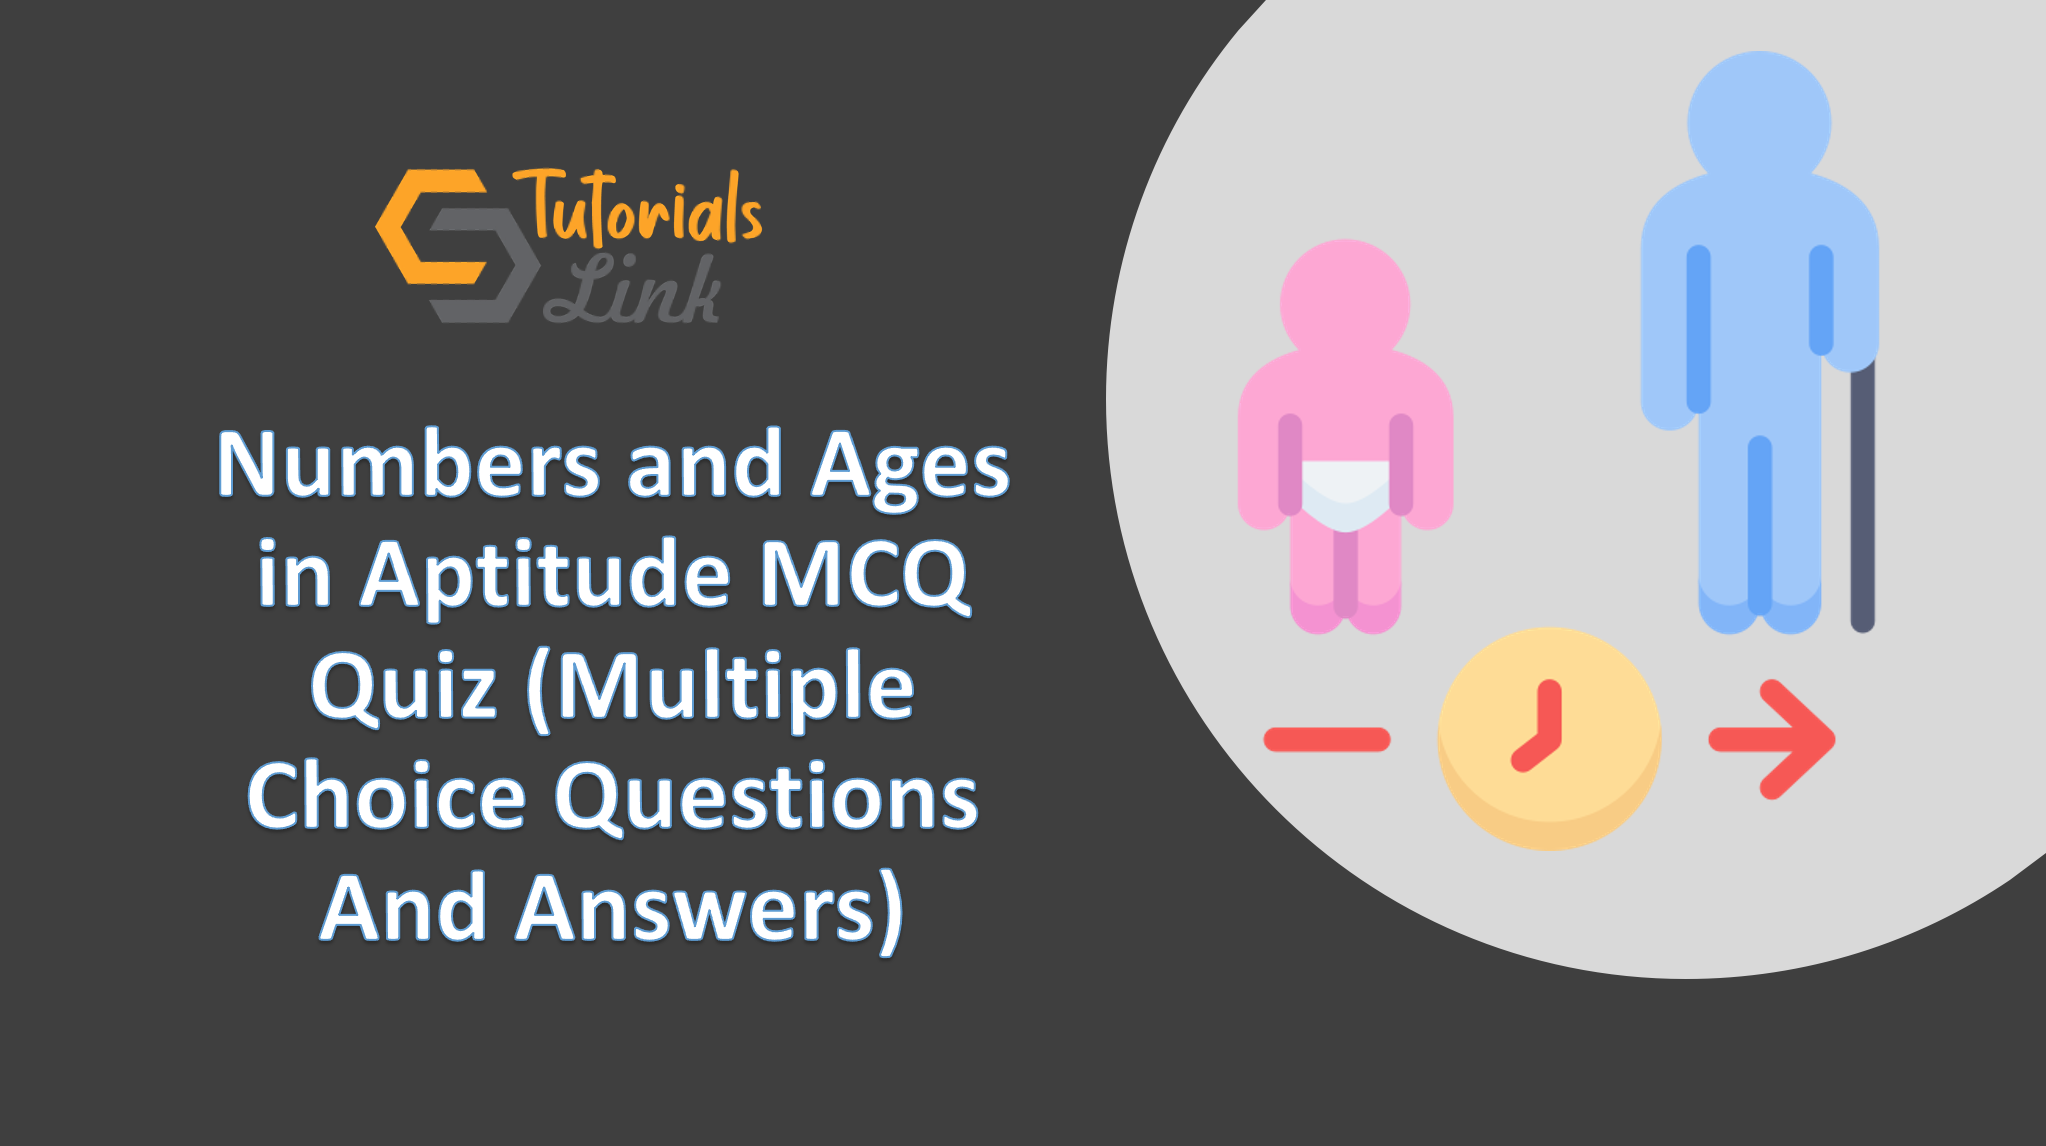 numbers-and-ages-in-aptitude-mcq-quiz-multiple-choice-questions-and-answers-tutorials-link